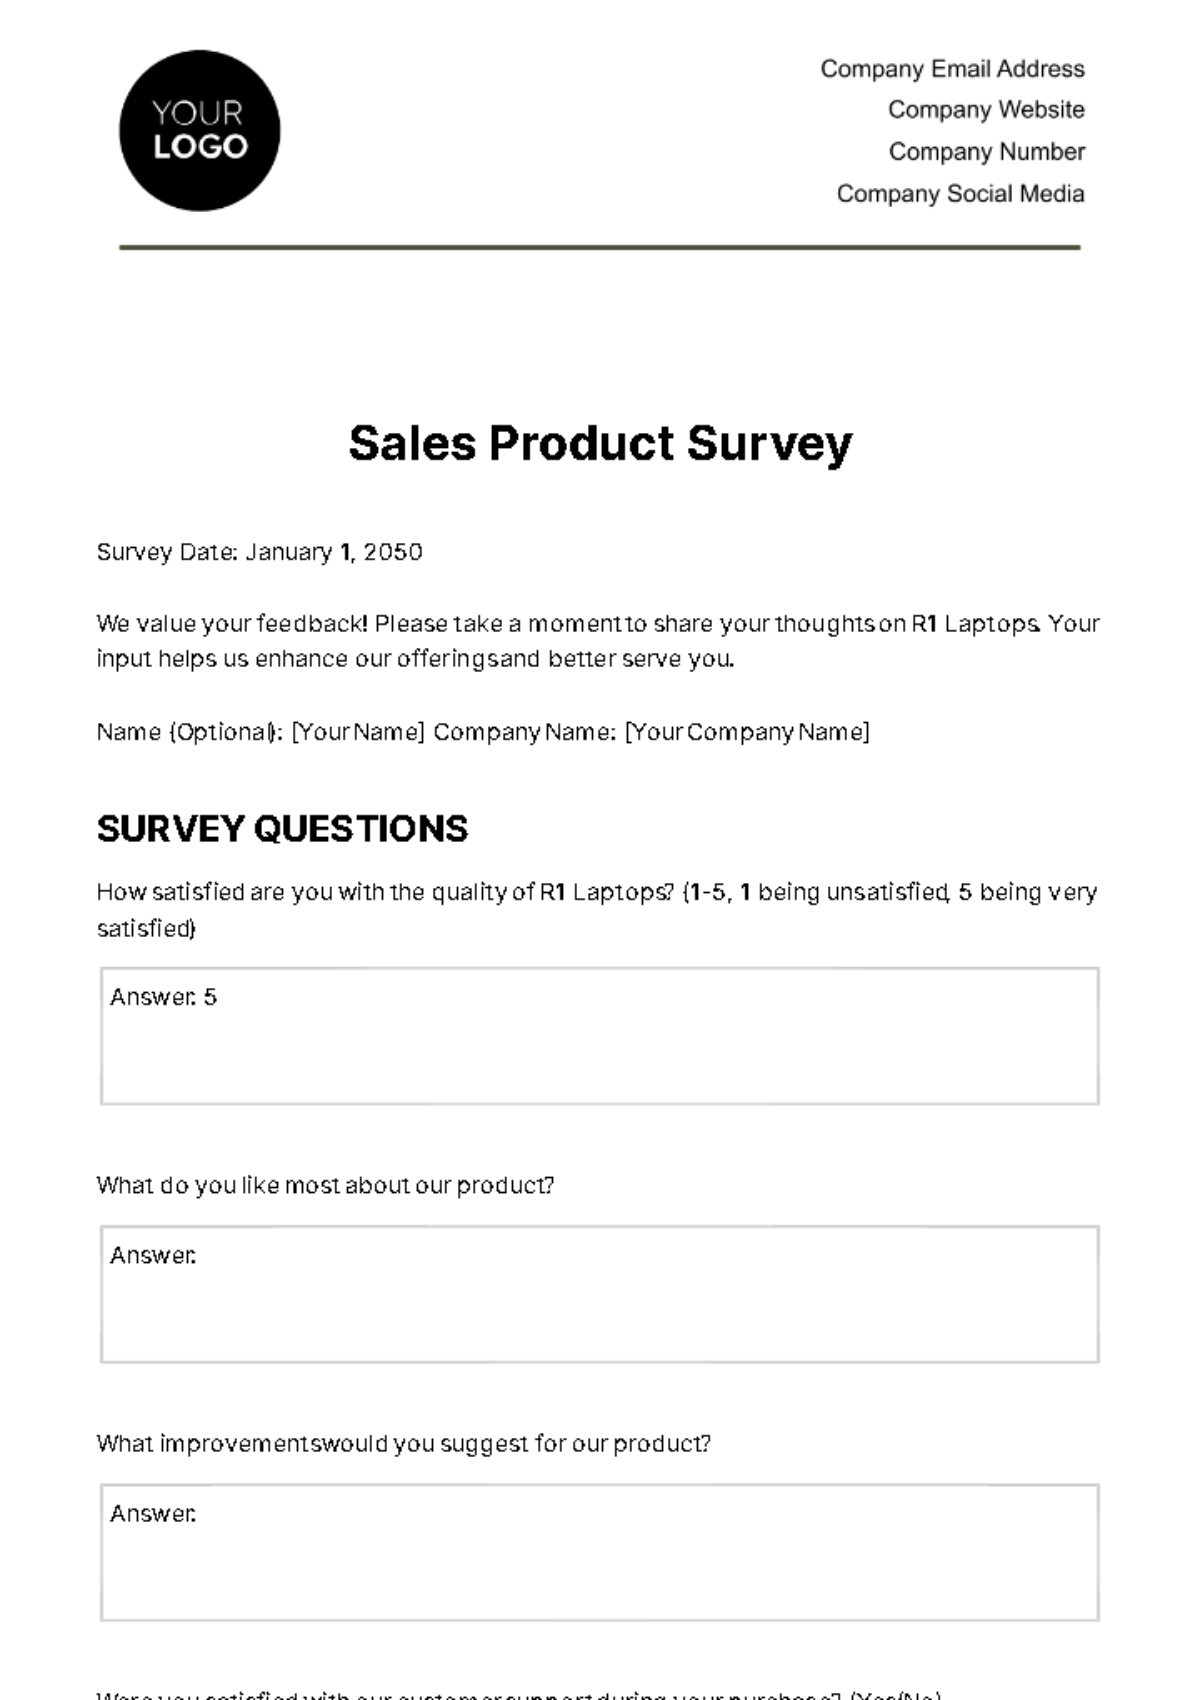 Free Sales Product Survey Template